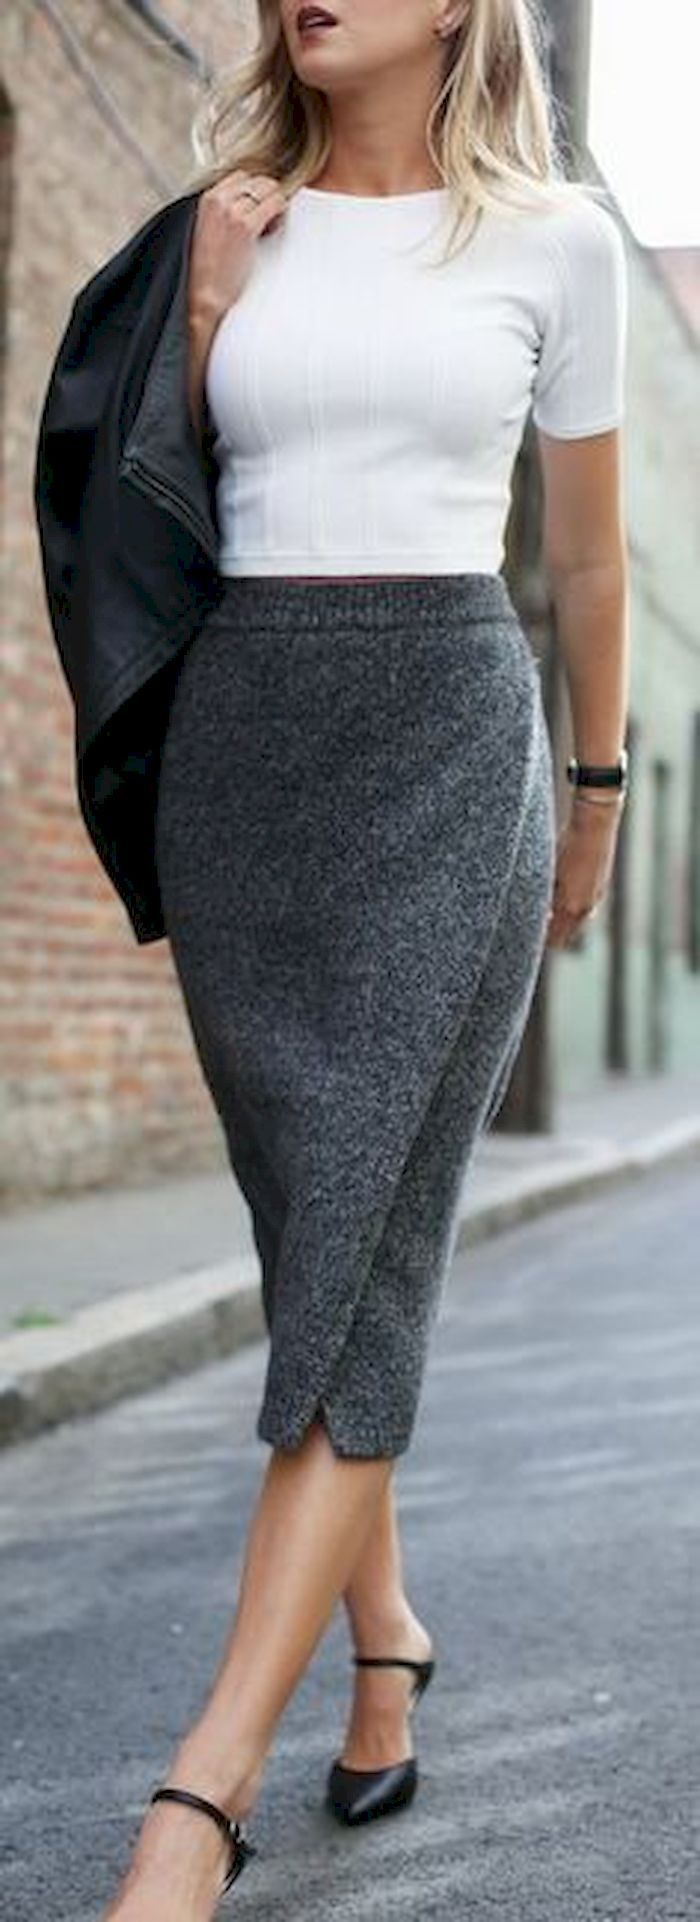 casual pencil skirt outfits with sneakers